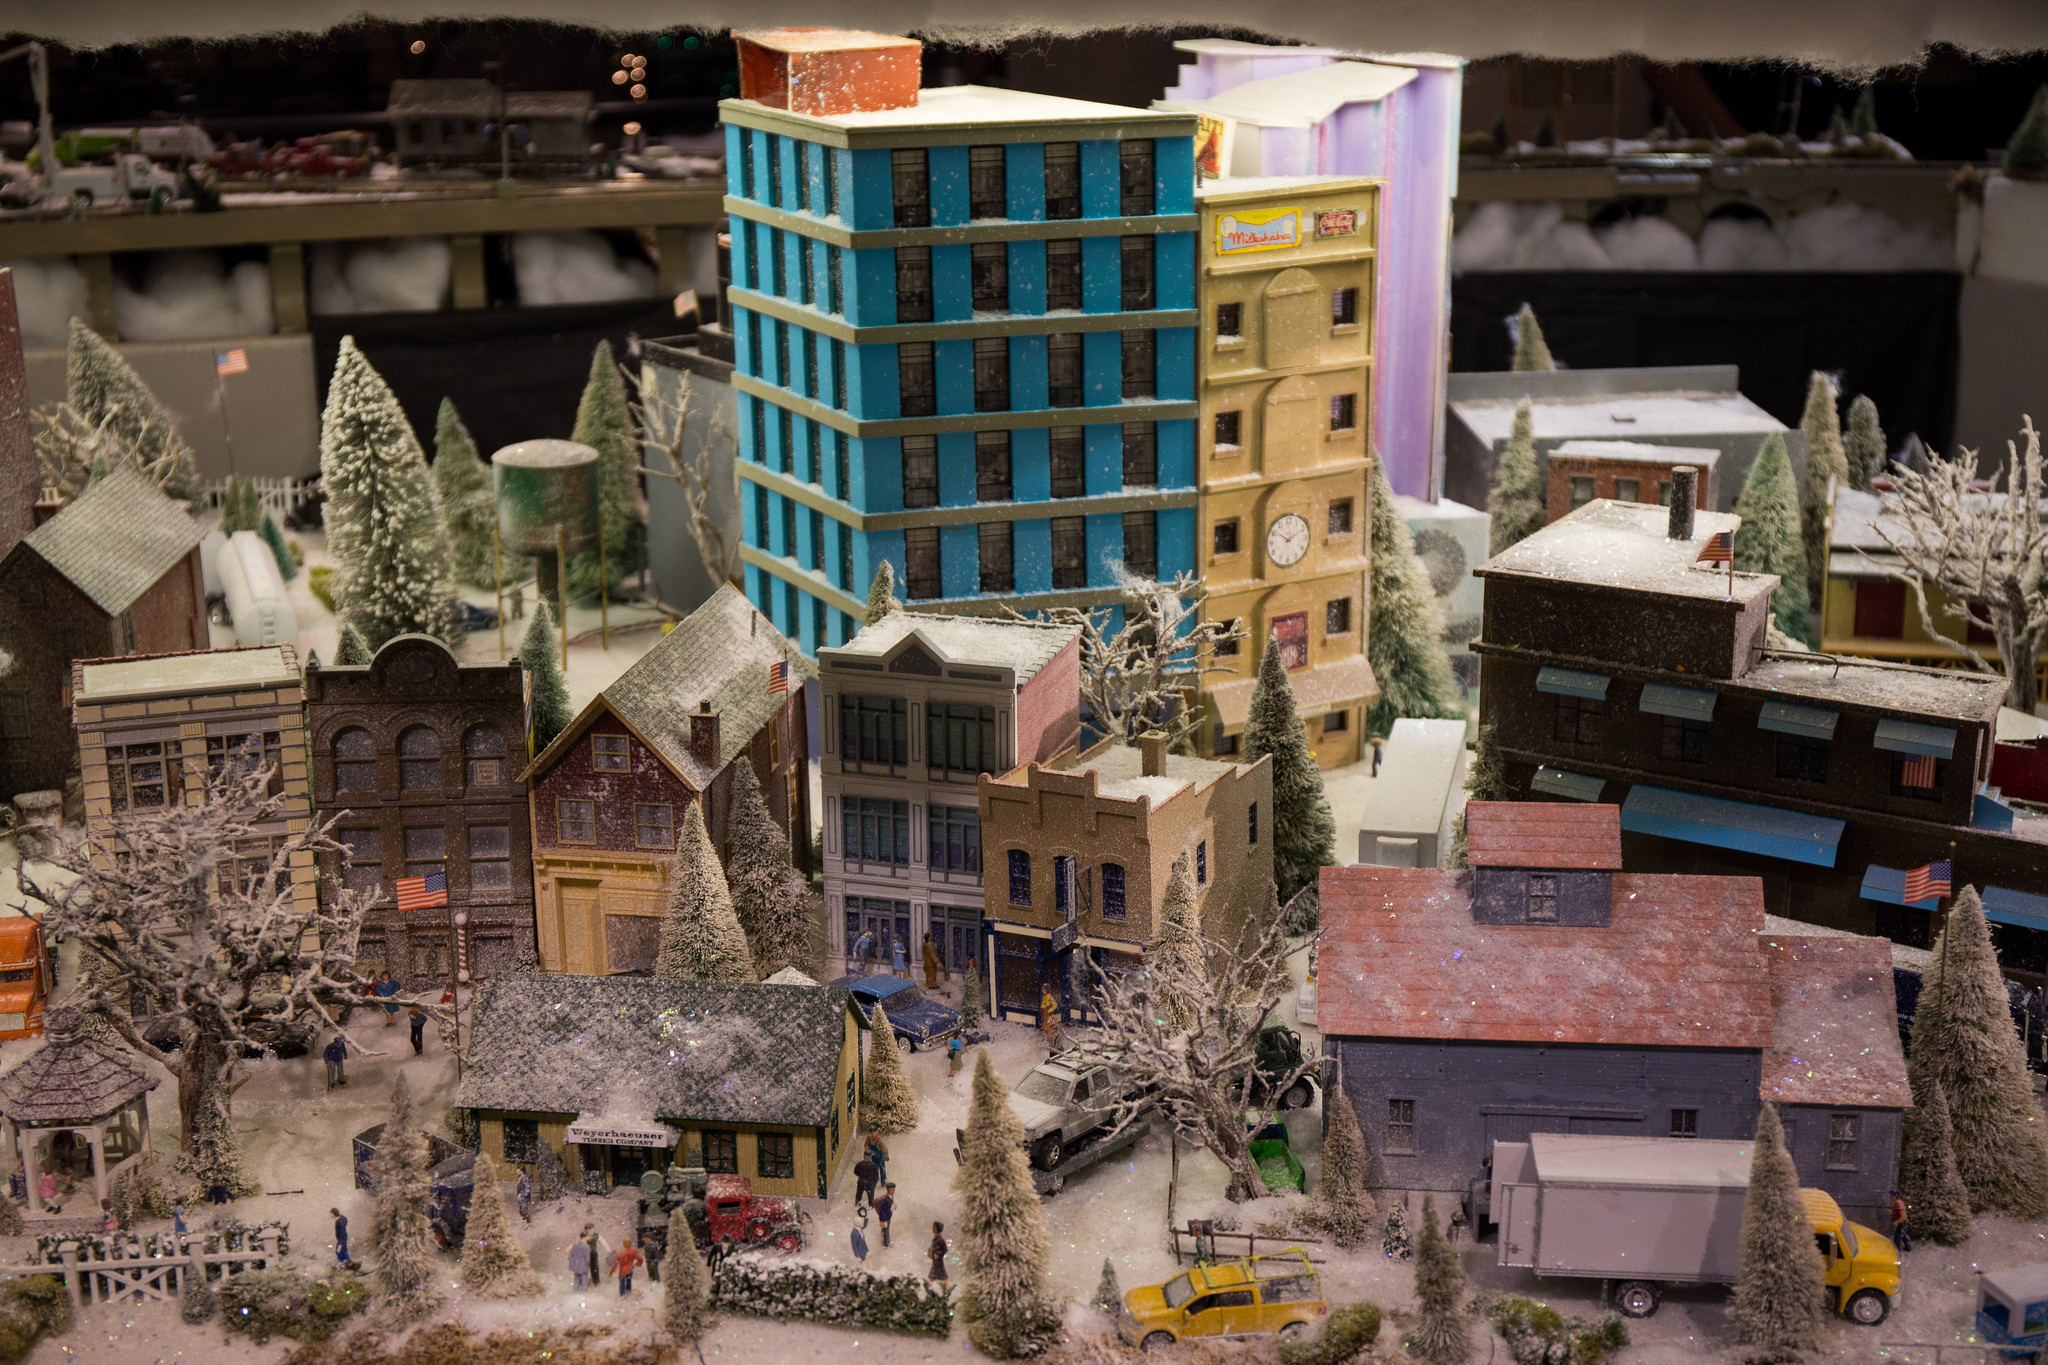 image of model city at union terminal